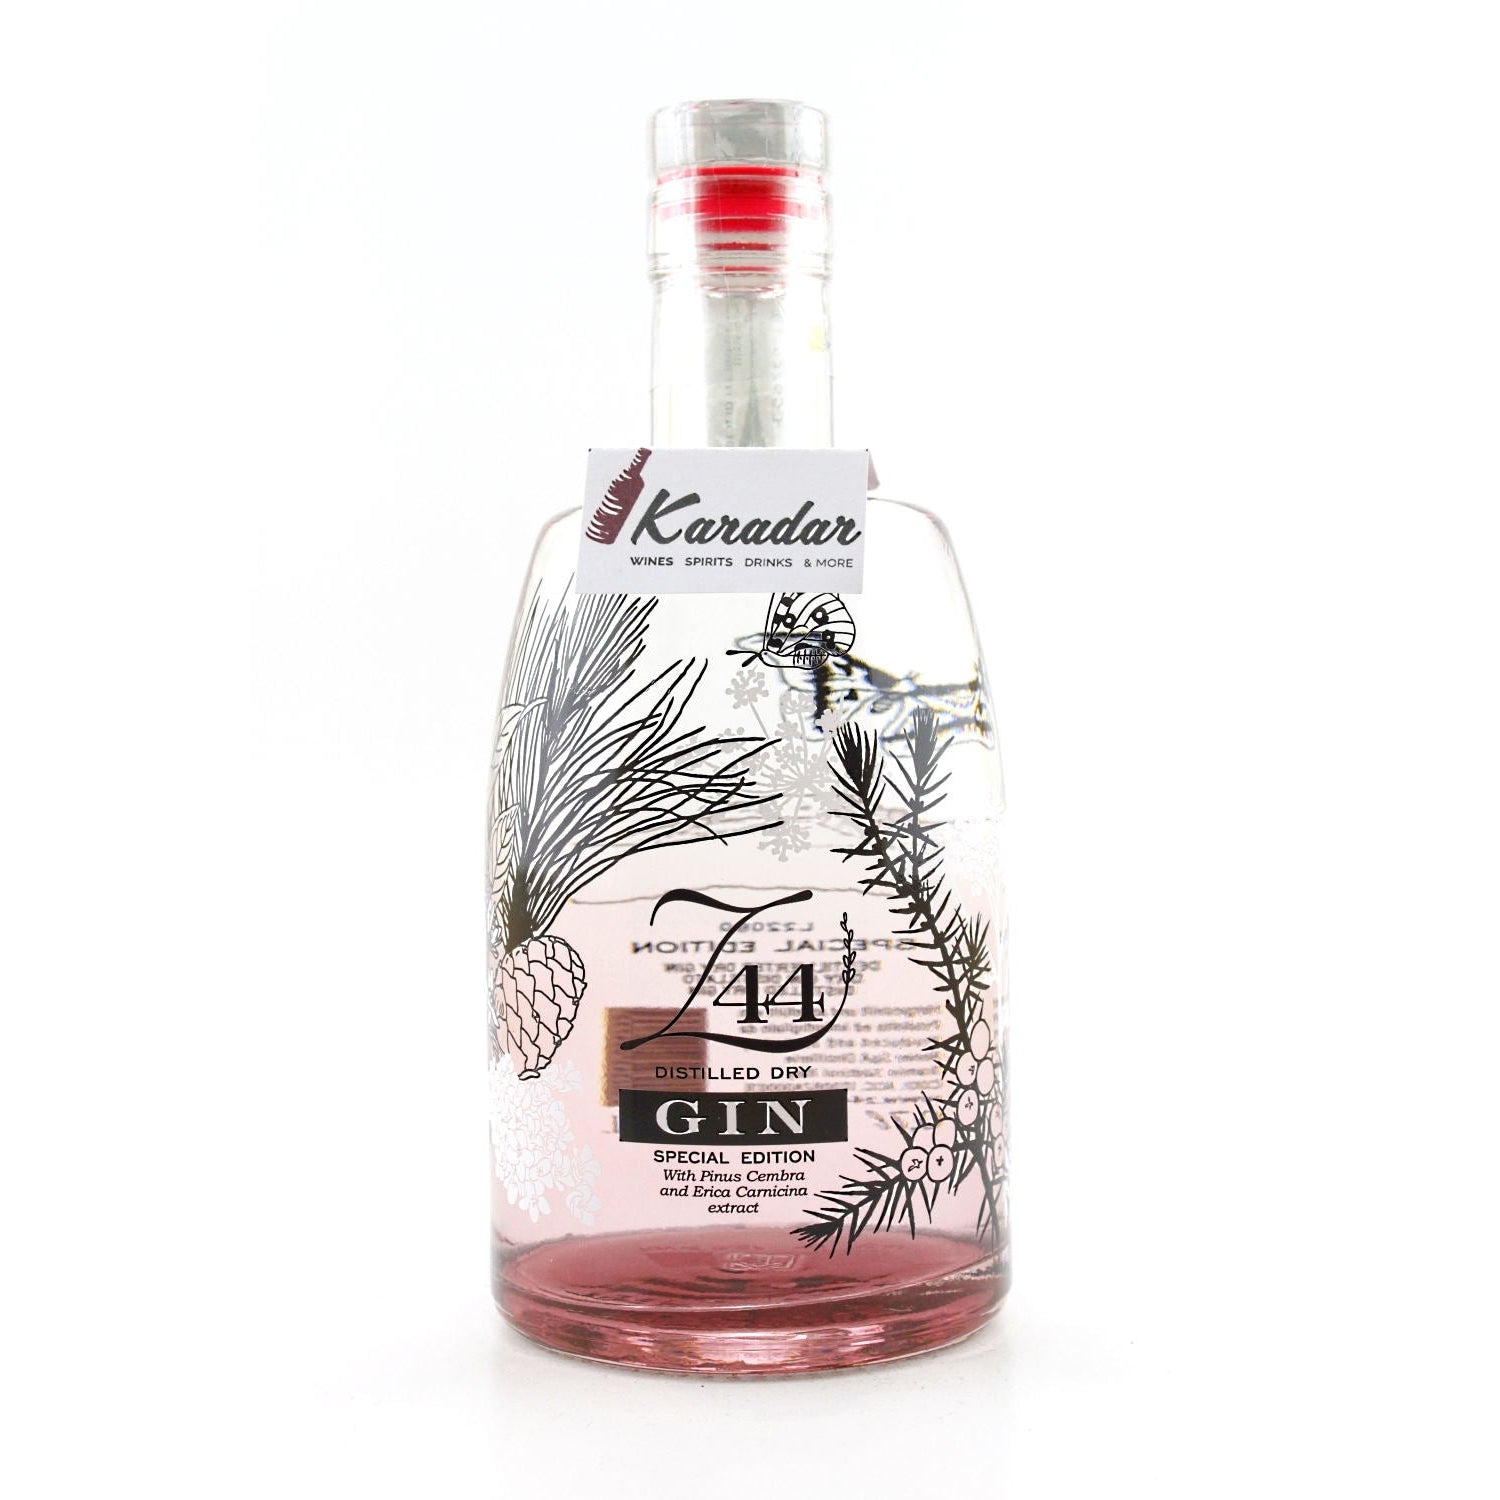 Z44 Distilled Dry Edition 0,7l Gin Special 45,5% Vol